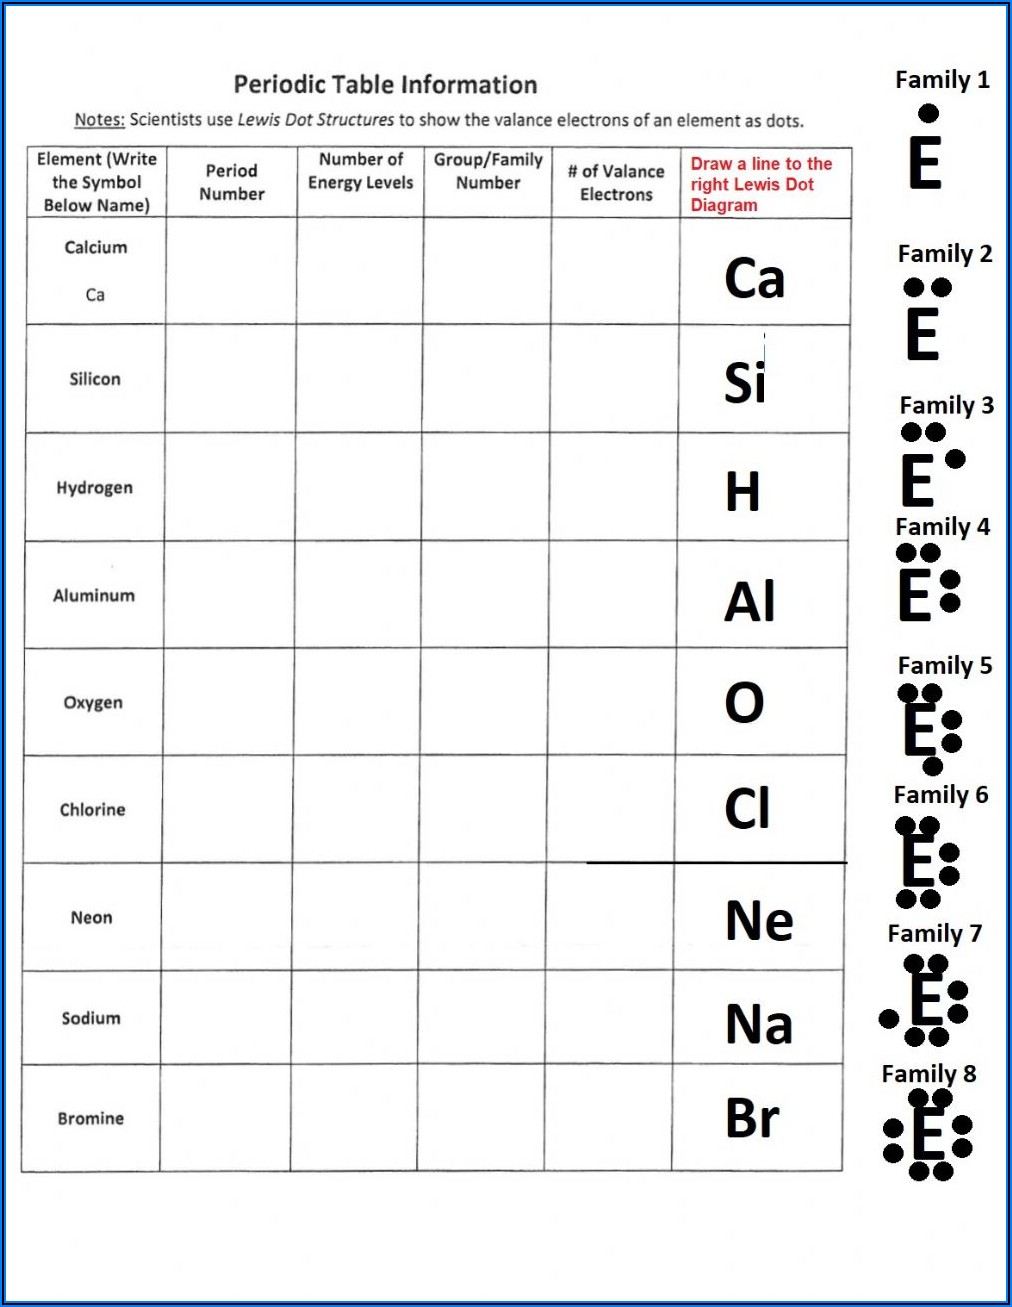 Periodic Table Information Worksheet Answers